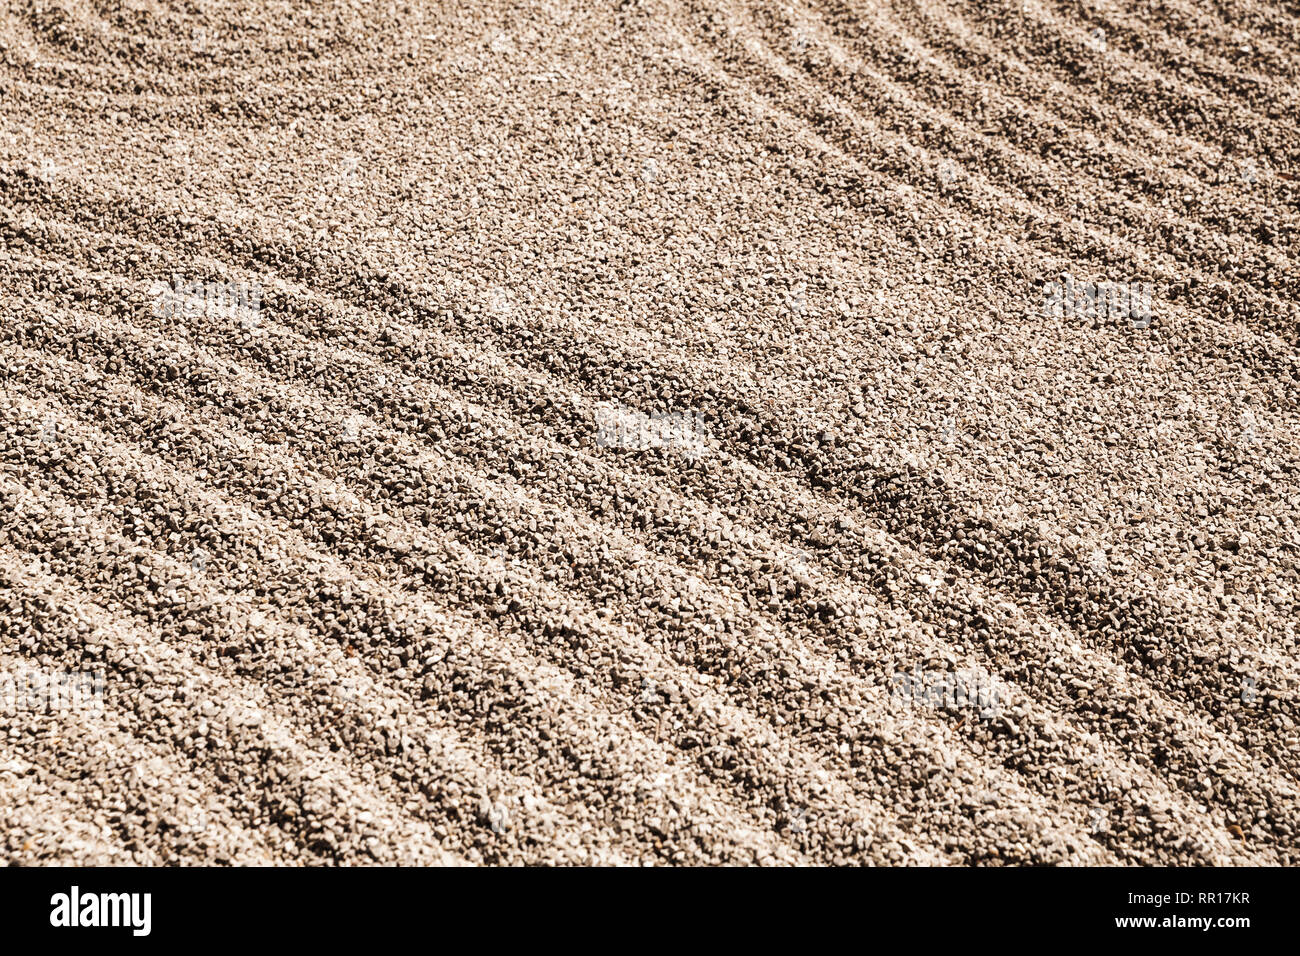 Zen pattern on the sand in the Japanese rock garden, background photo texture Stock Photo